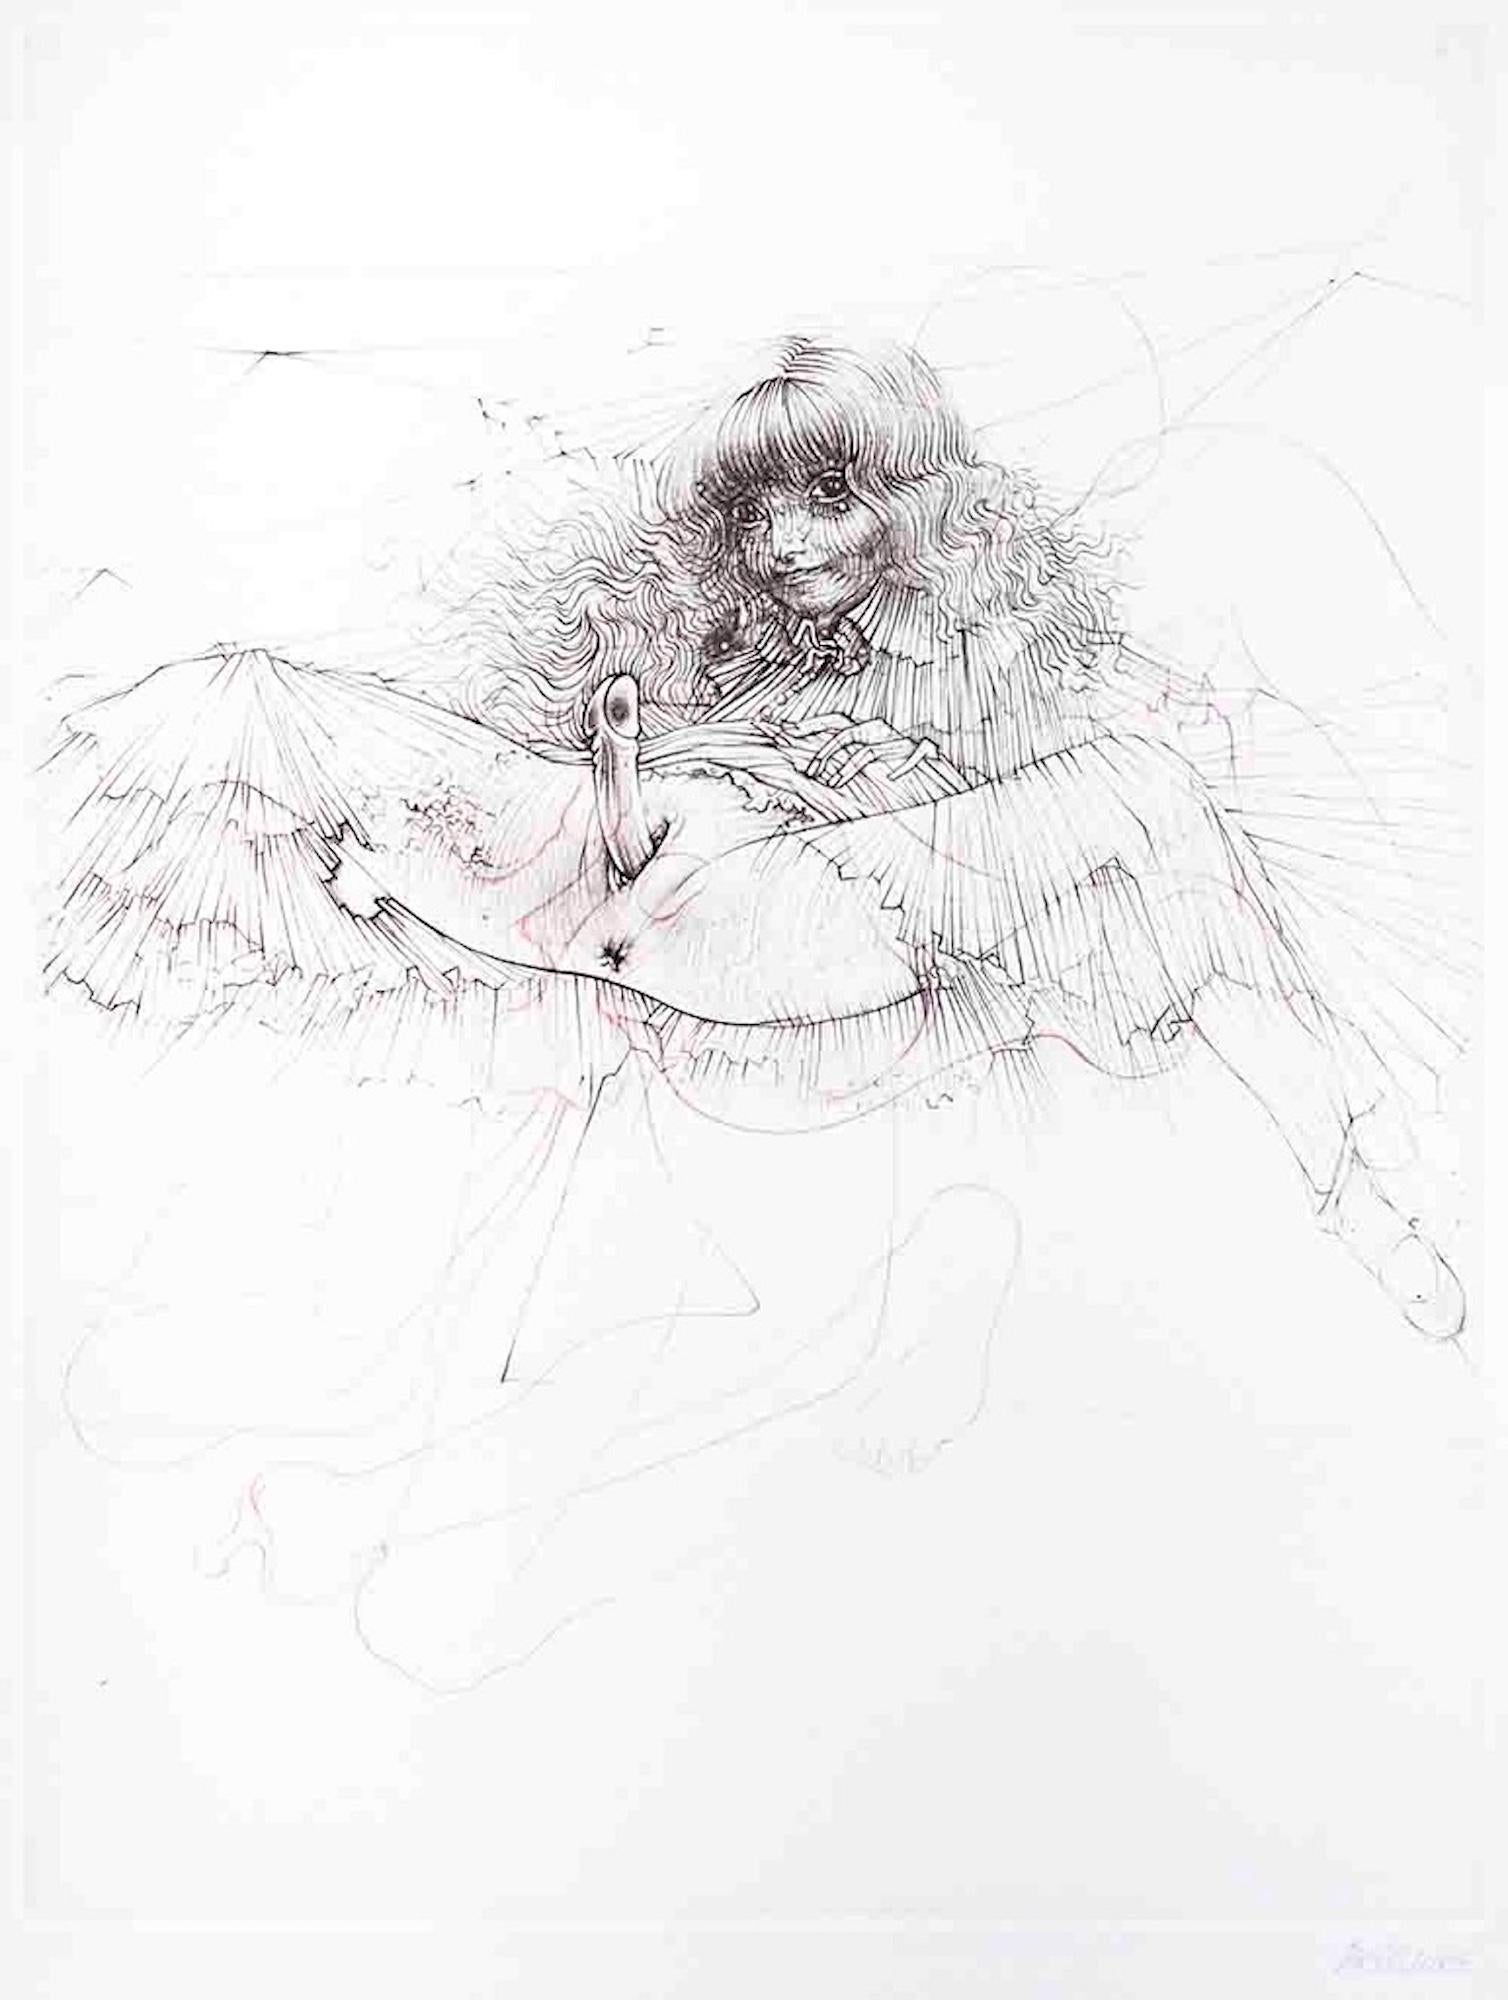 Hans Bellmer Print - L'Aigle Mademoiselle - Etching by H. Bellmer - 1968